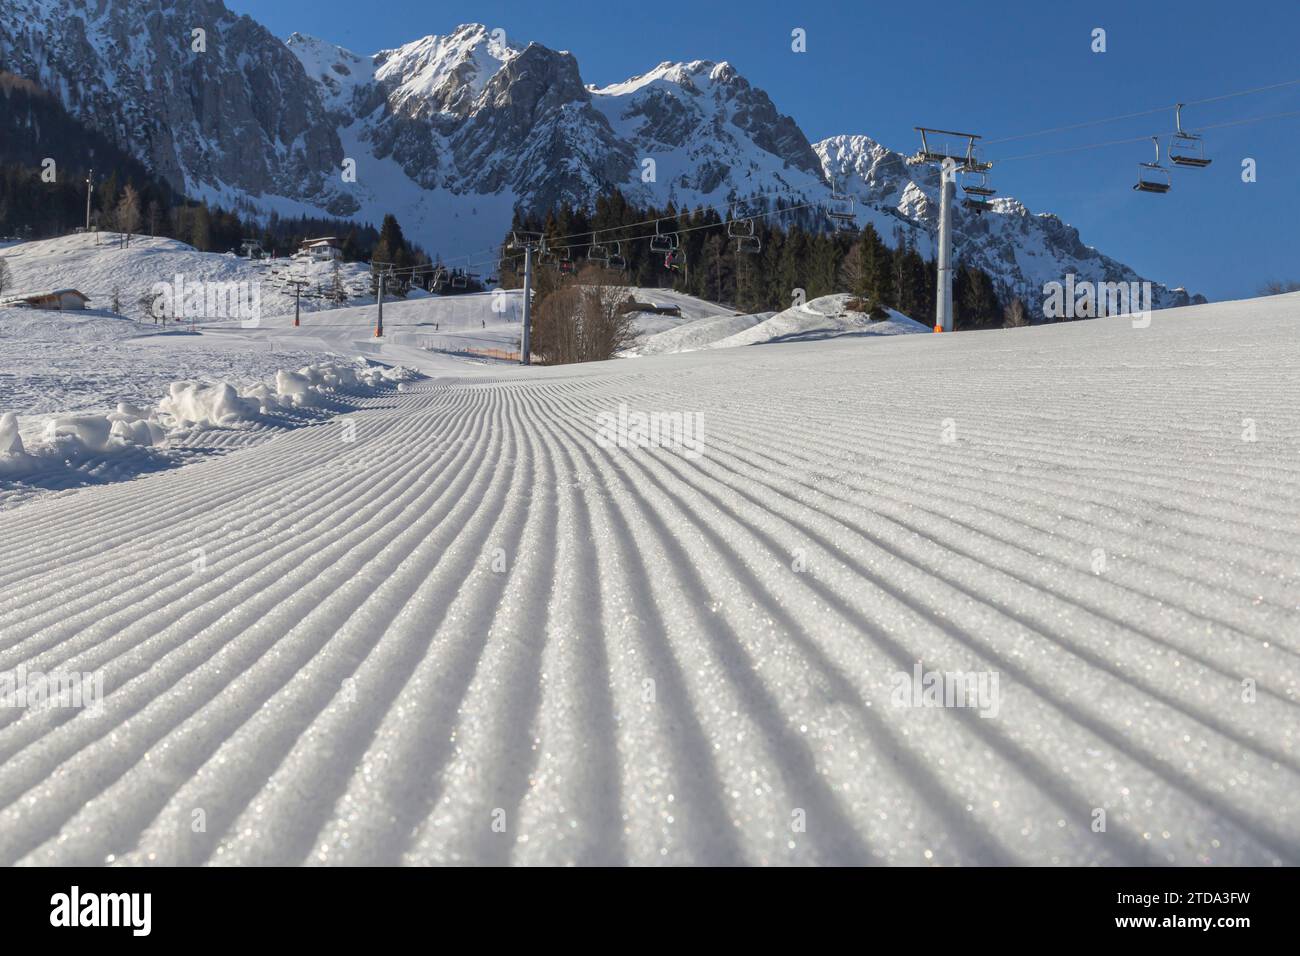 Well-prepared ski slopes and ski lift in the background in mountains in the Alps. Austria Stock Photo